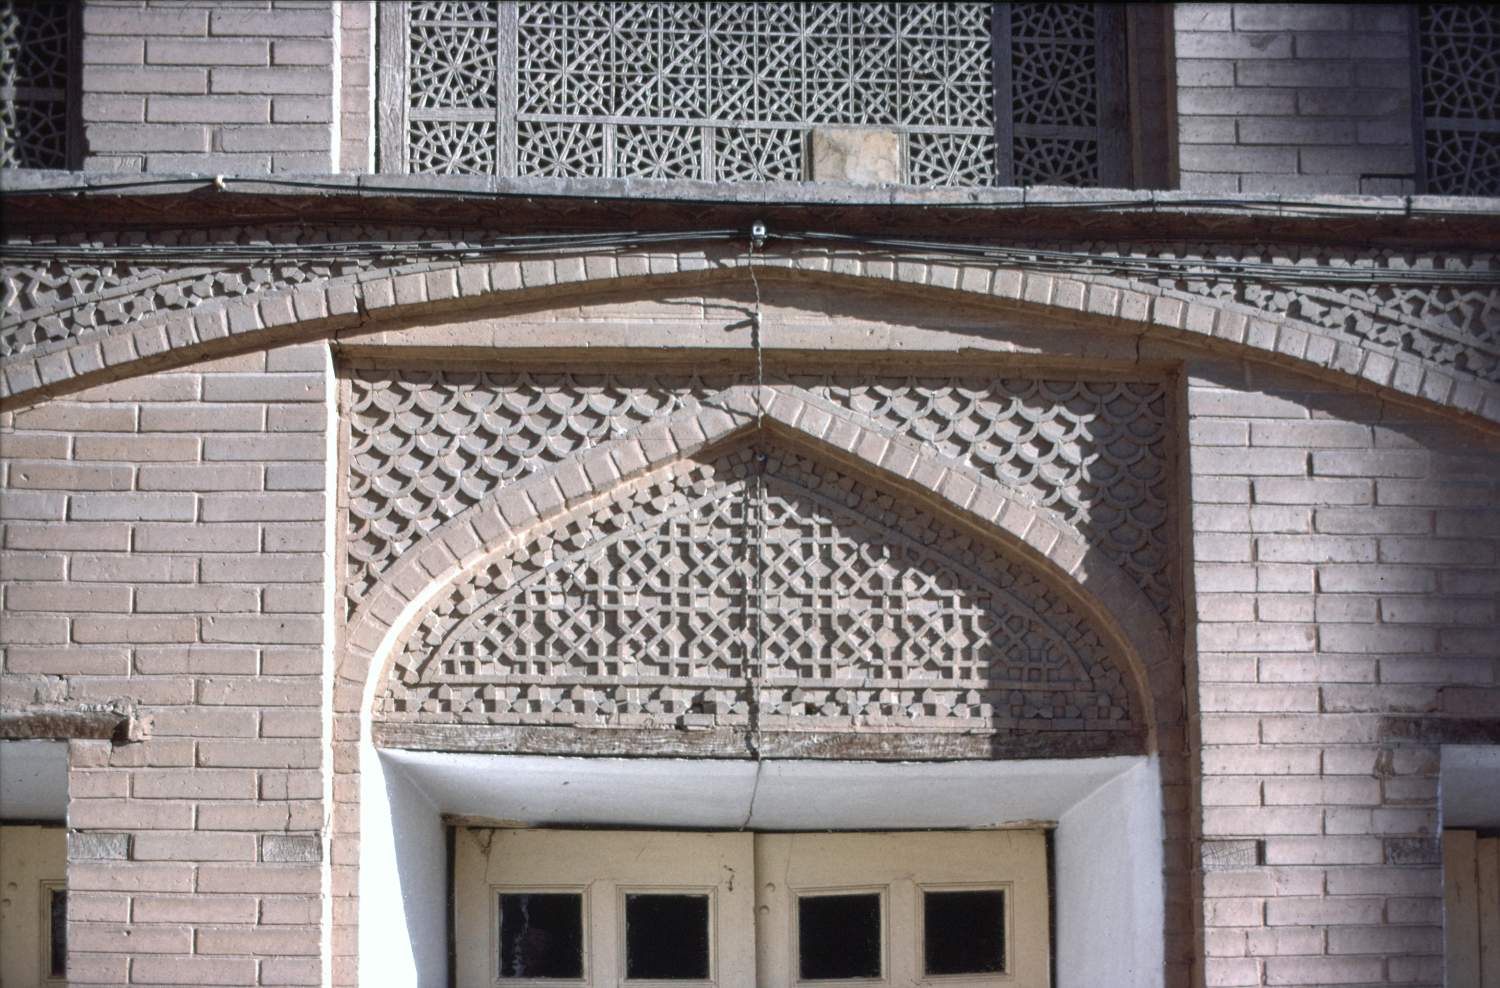 Private house in Julfa neighborhood of Isfahan, detail of carved decorations on facade